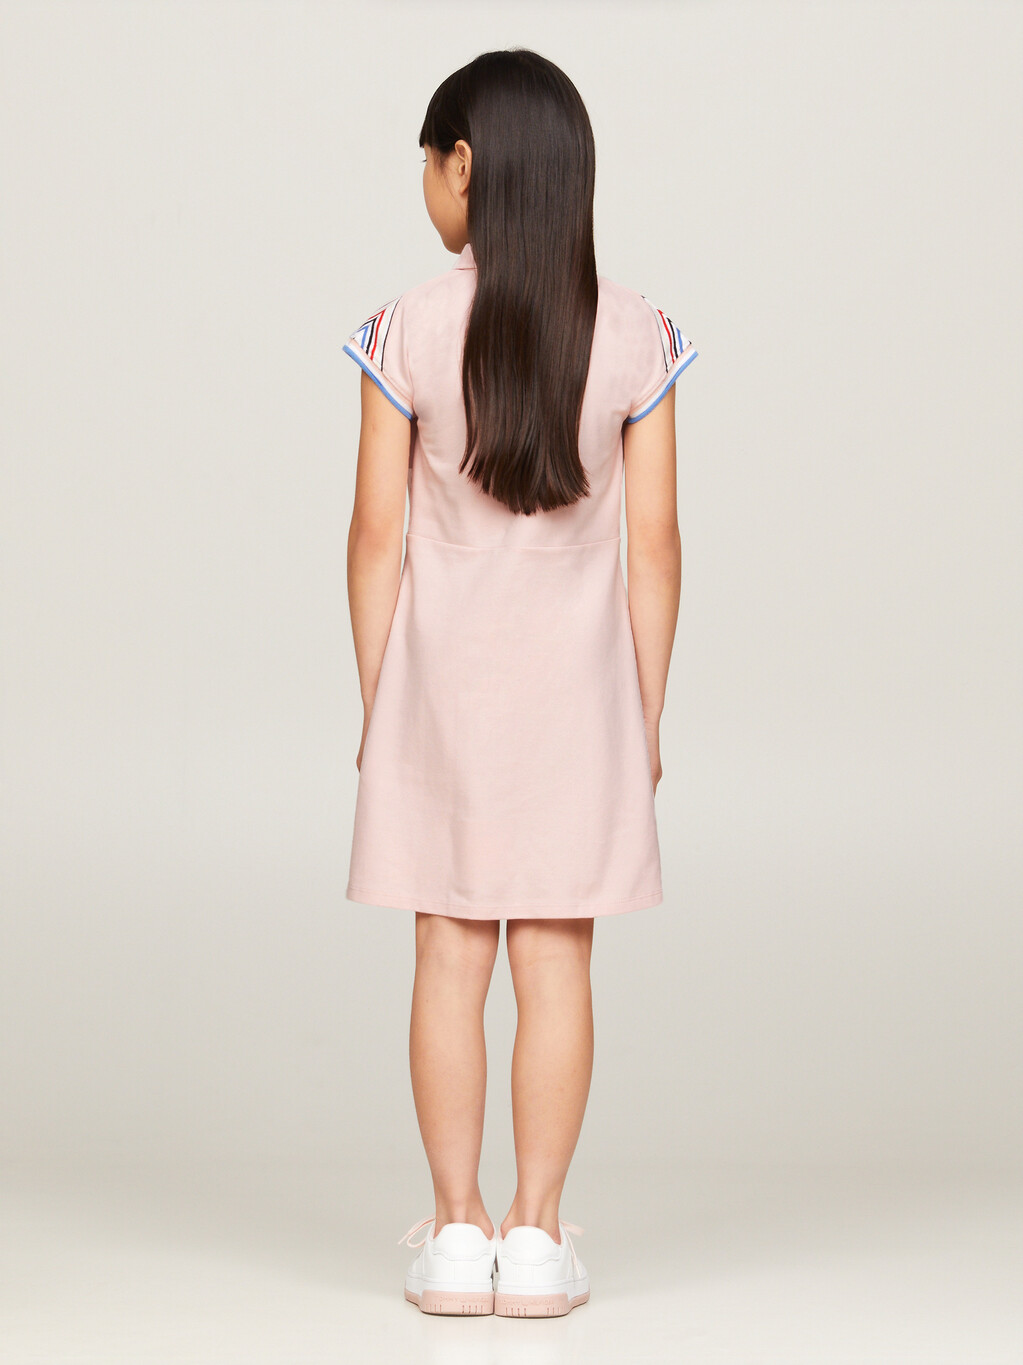 1985 Collection Short Sleeve Polo Dress, Whimsy Pink, hi-res